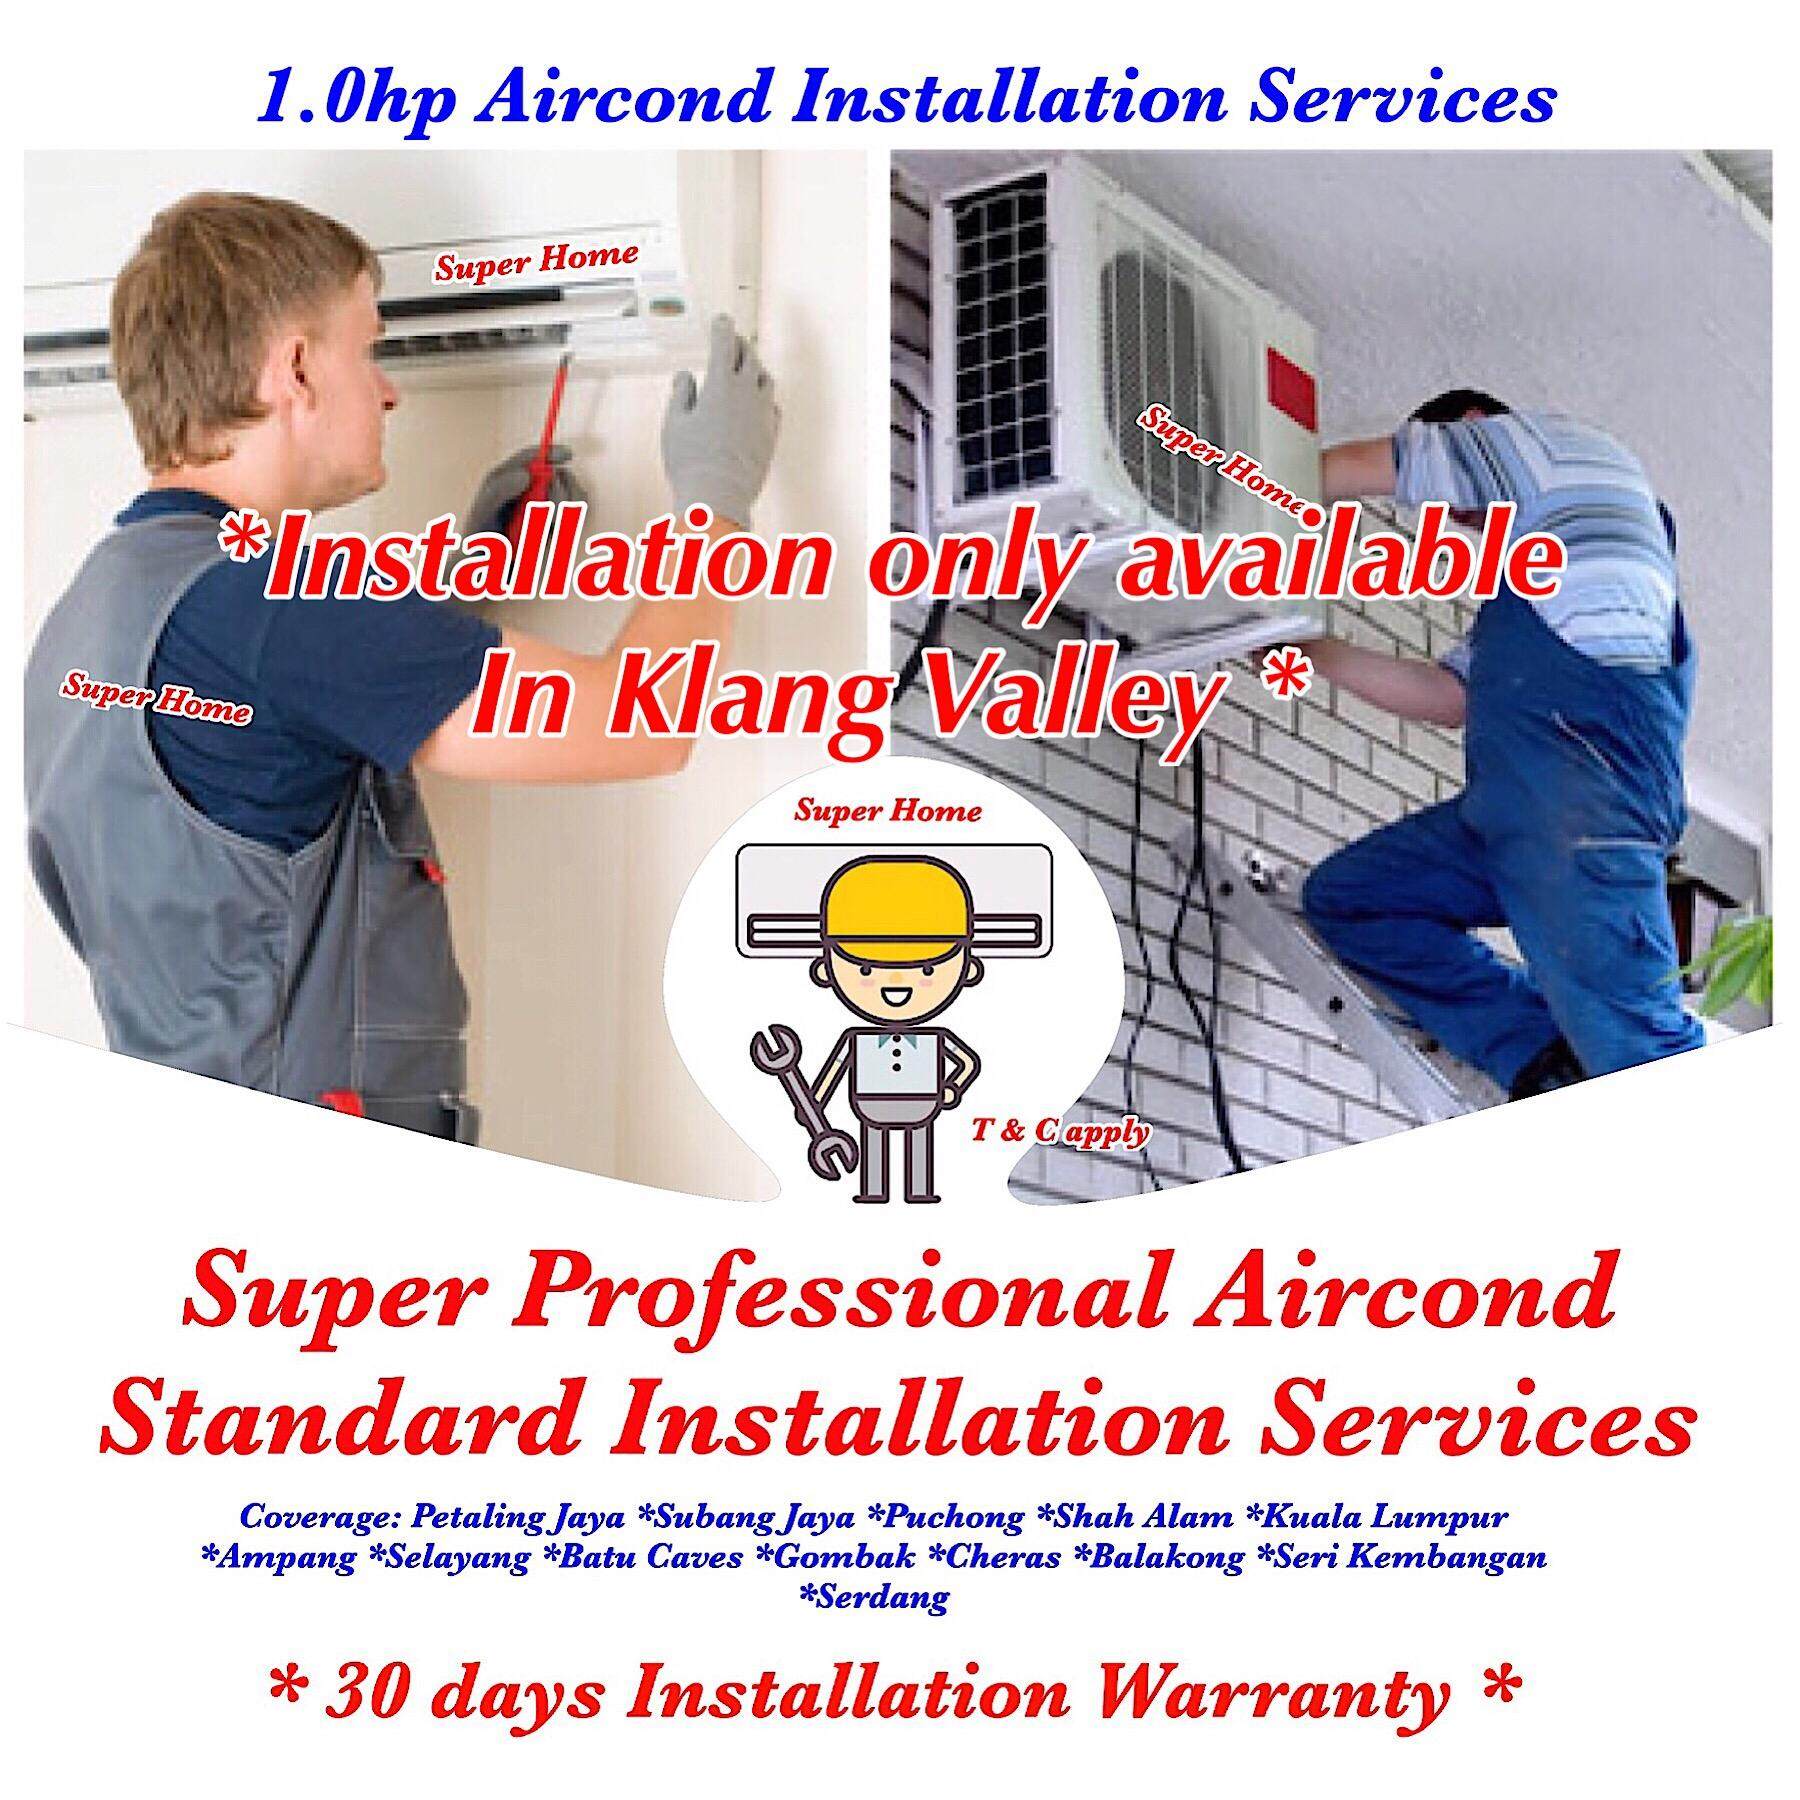 Super Professional 1.0hp Aircond Installation Services (Wall Split) Air Conditioner - Standard Installation Services with in 10ft Copper Piping